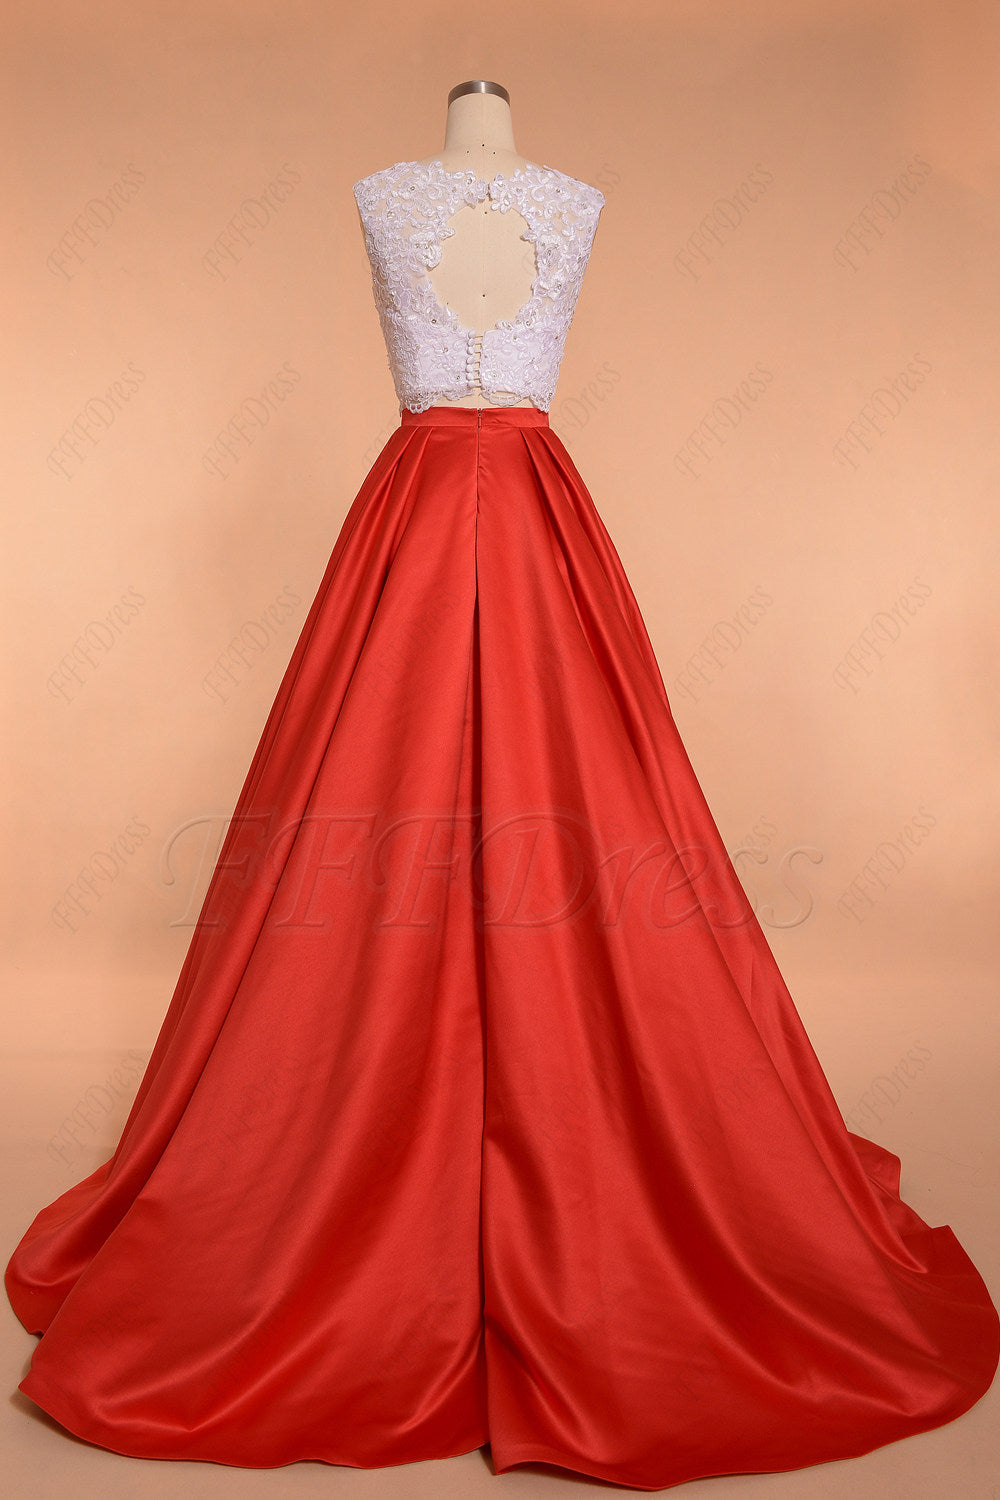 Two Piece Red Ball Gown Prom Dresses